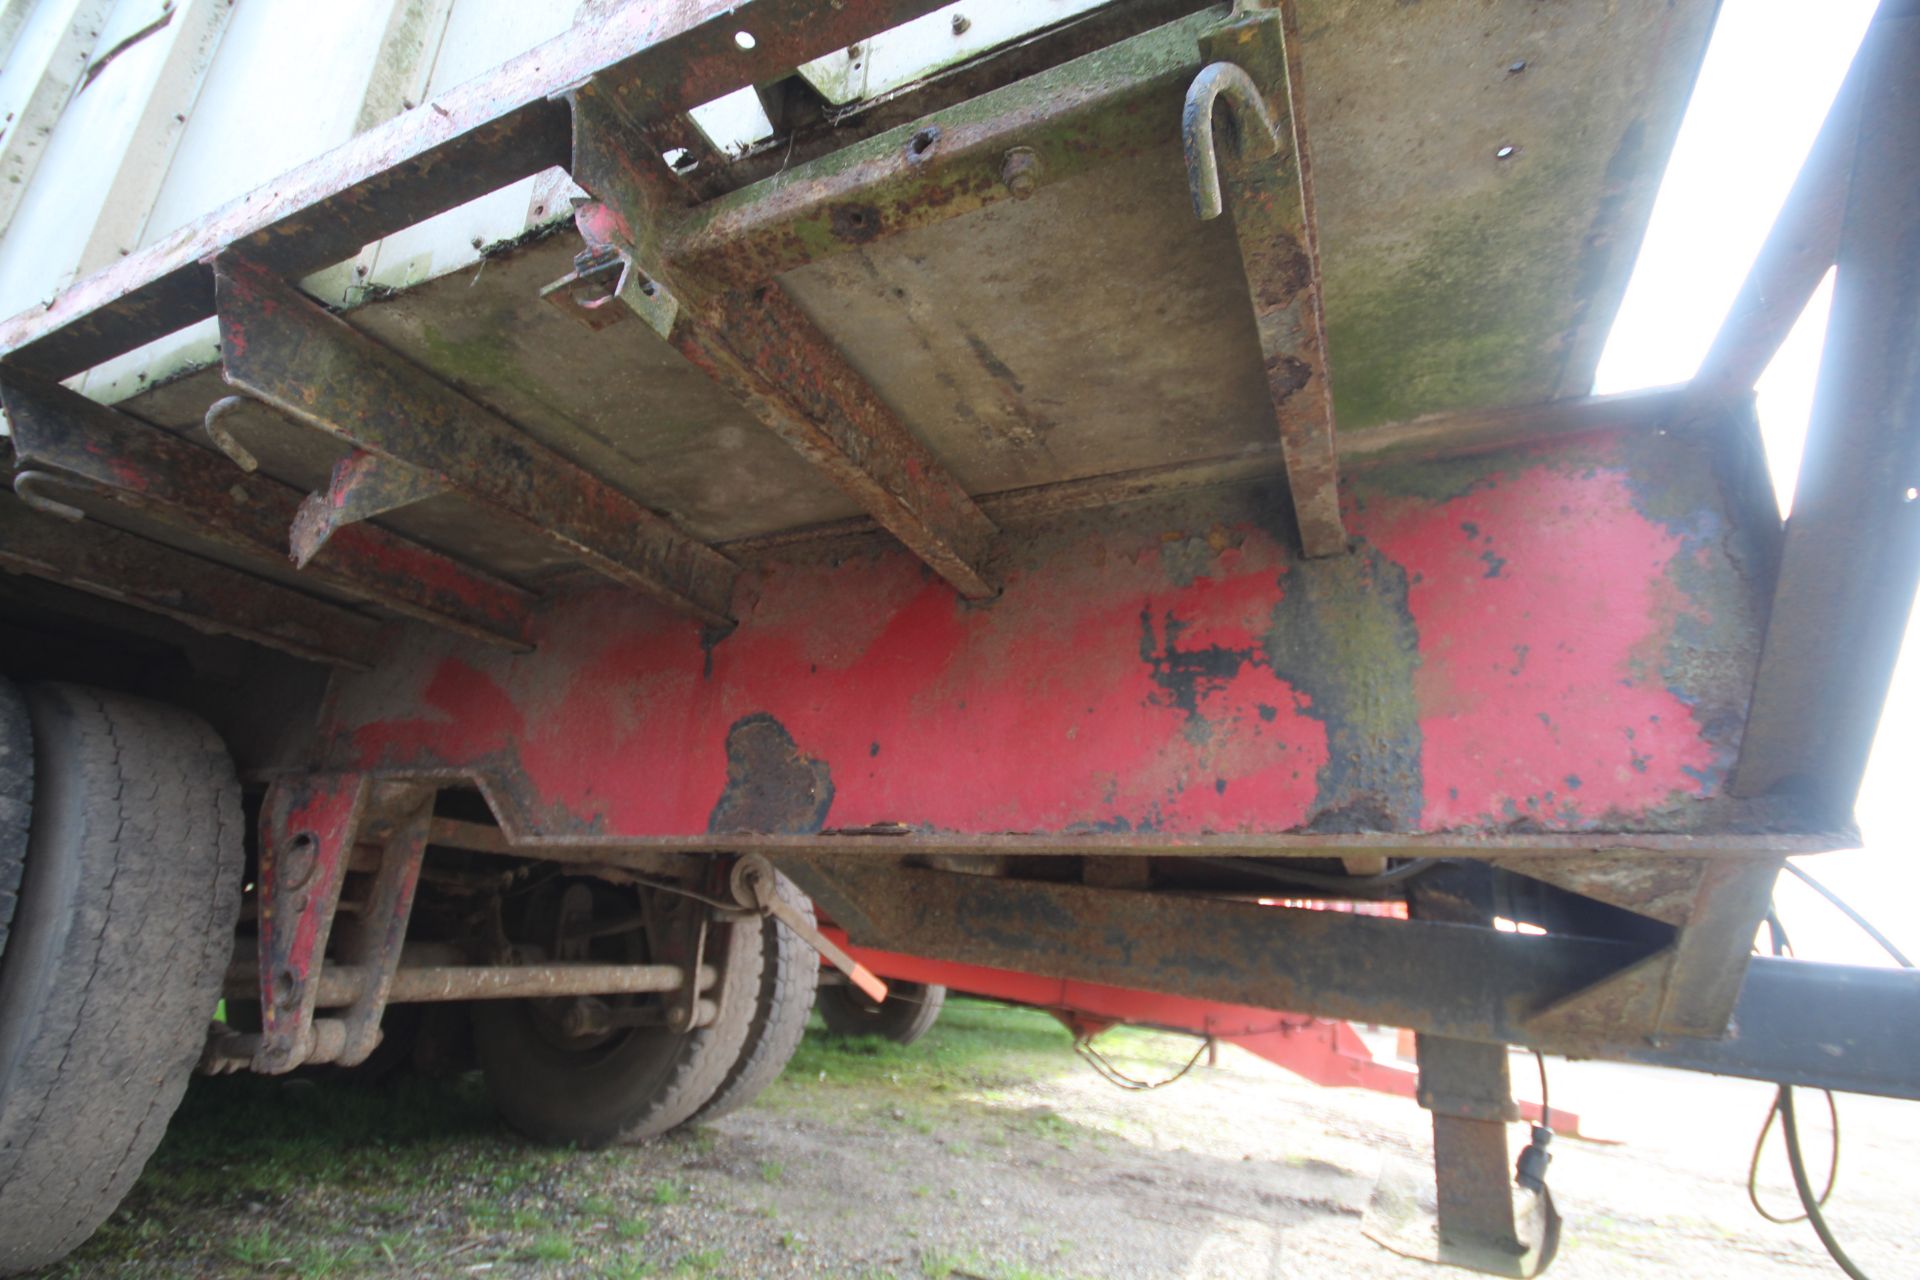 19ft 6in twin axle tractor drawn livestock trailer. Ex-lorry drag. With steel suspension and twin - Image 34 of 34